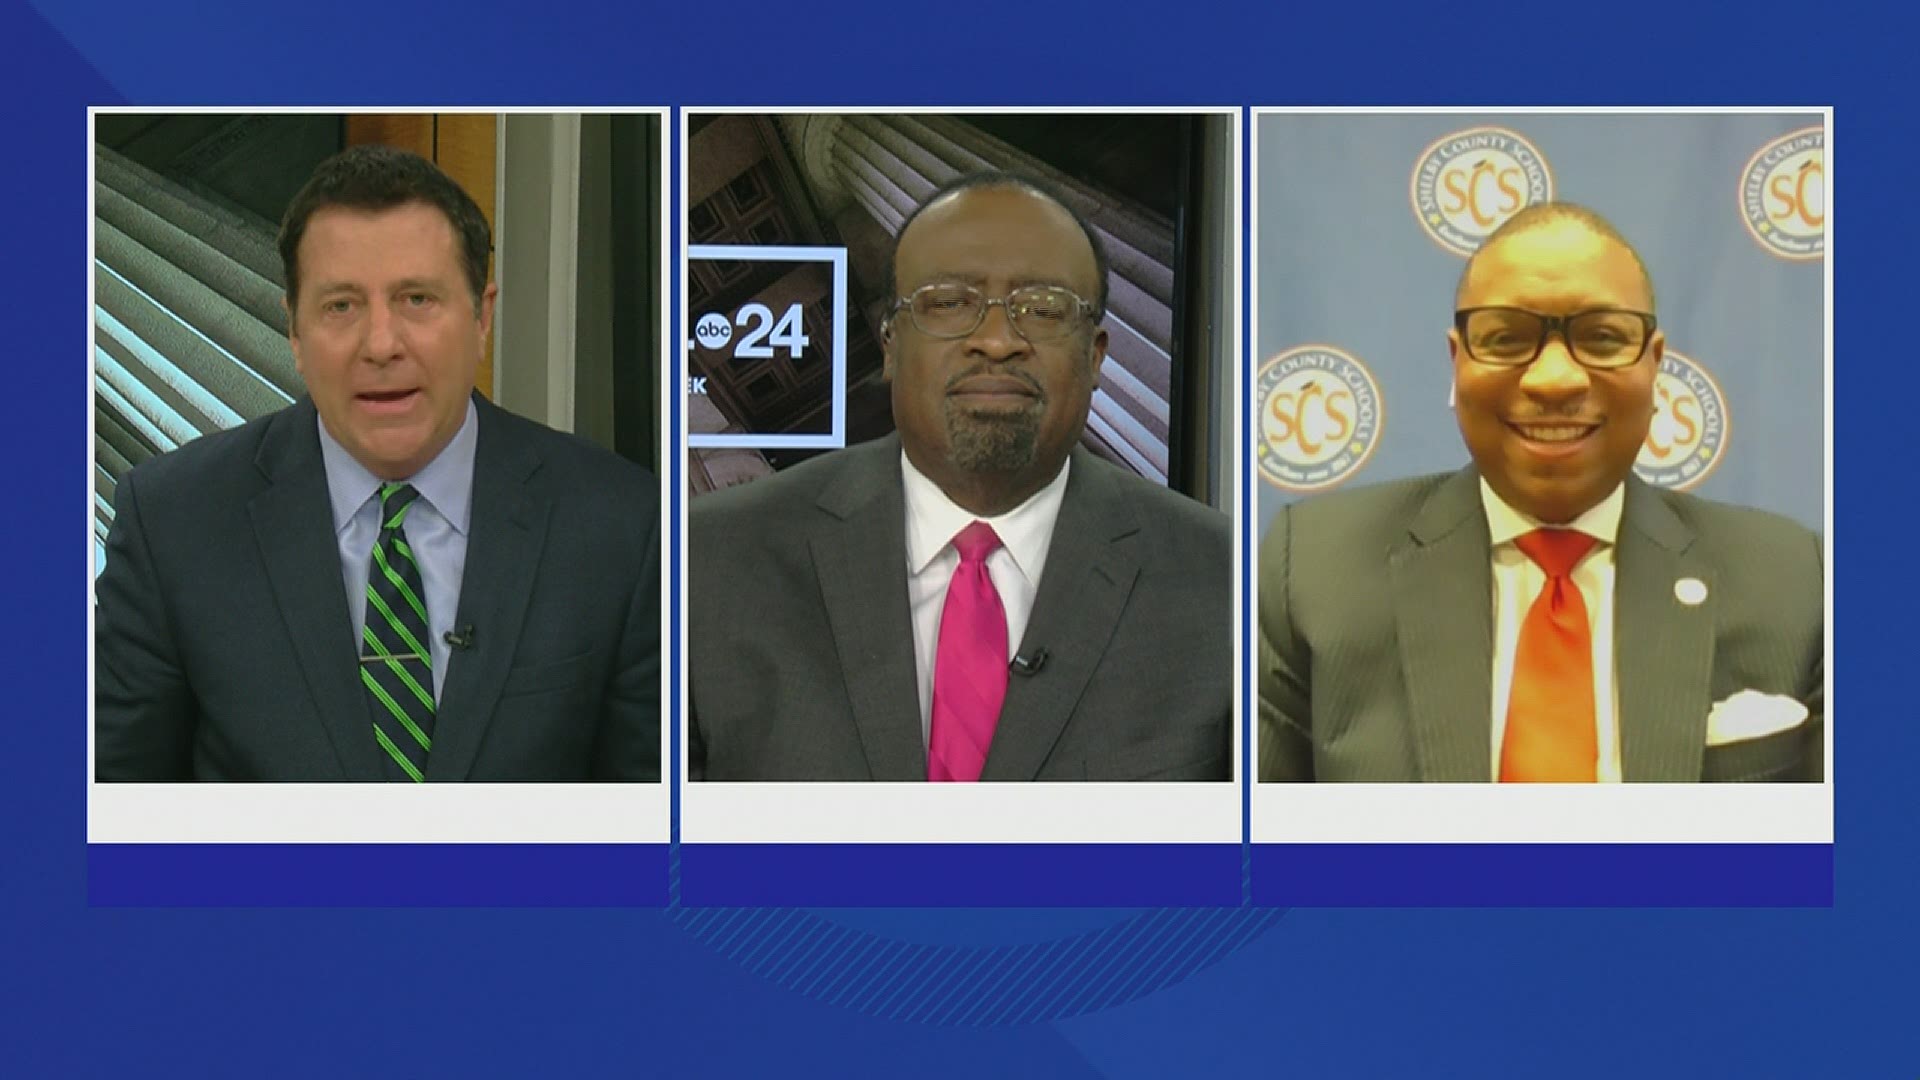 Local 24 News Anchor Richard Ransom talks with his Local 24 Commentator and Political Analyst Otis Sanford and SCS Superintendent Joris Ray about reopening schools.